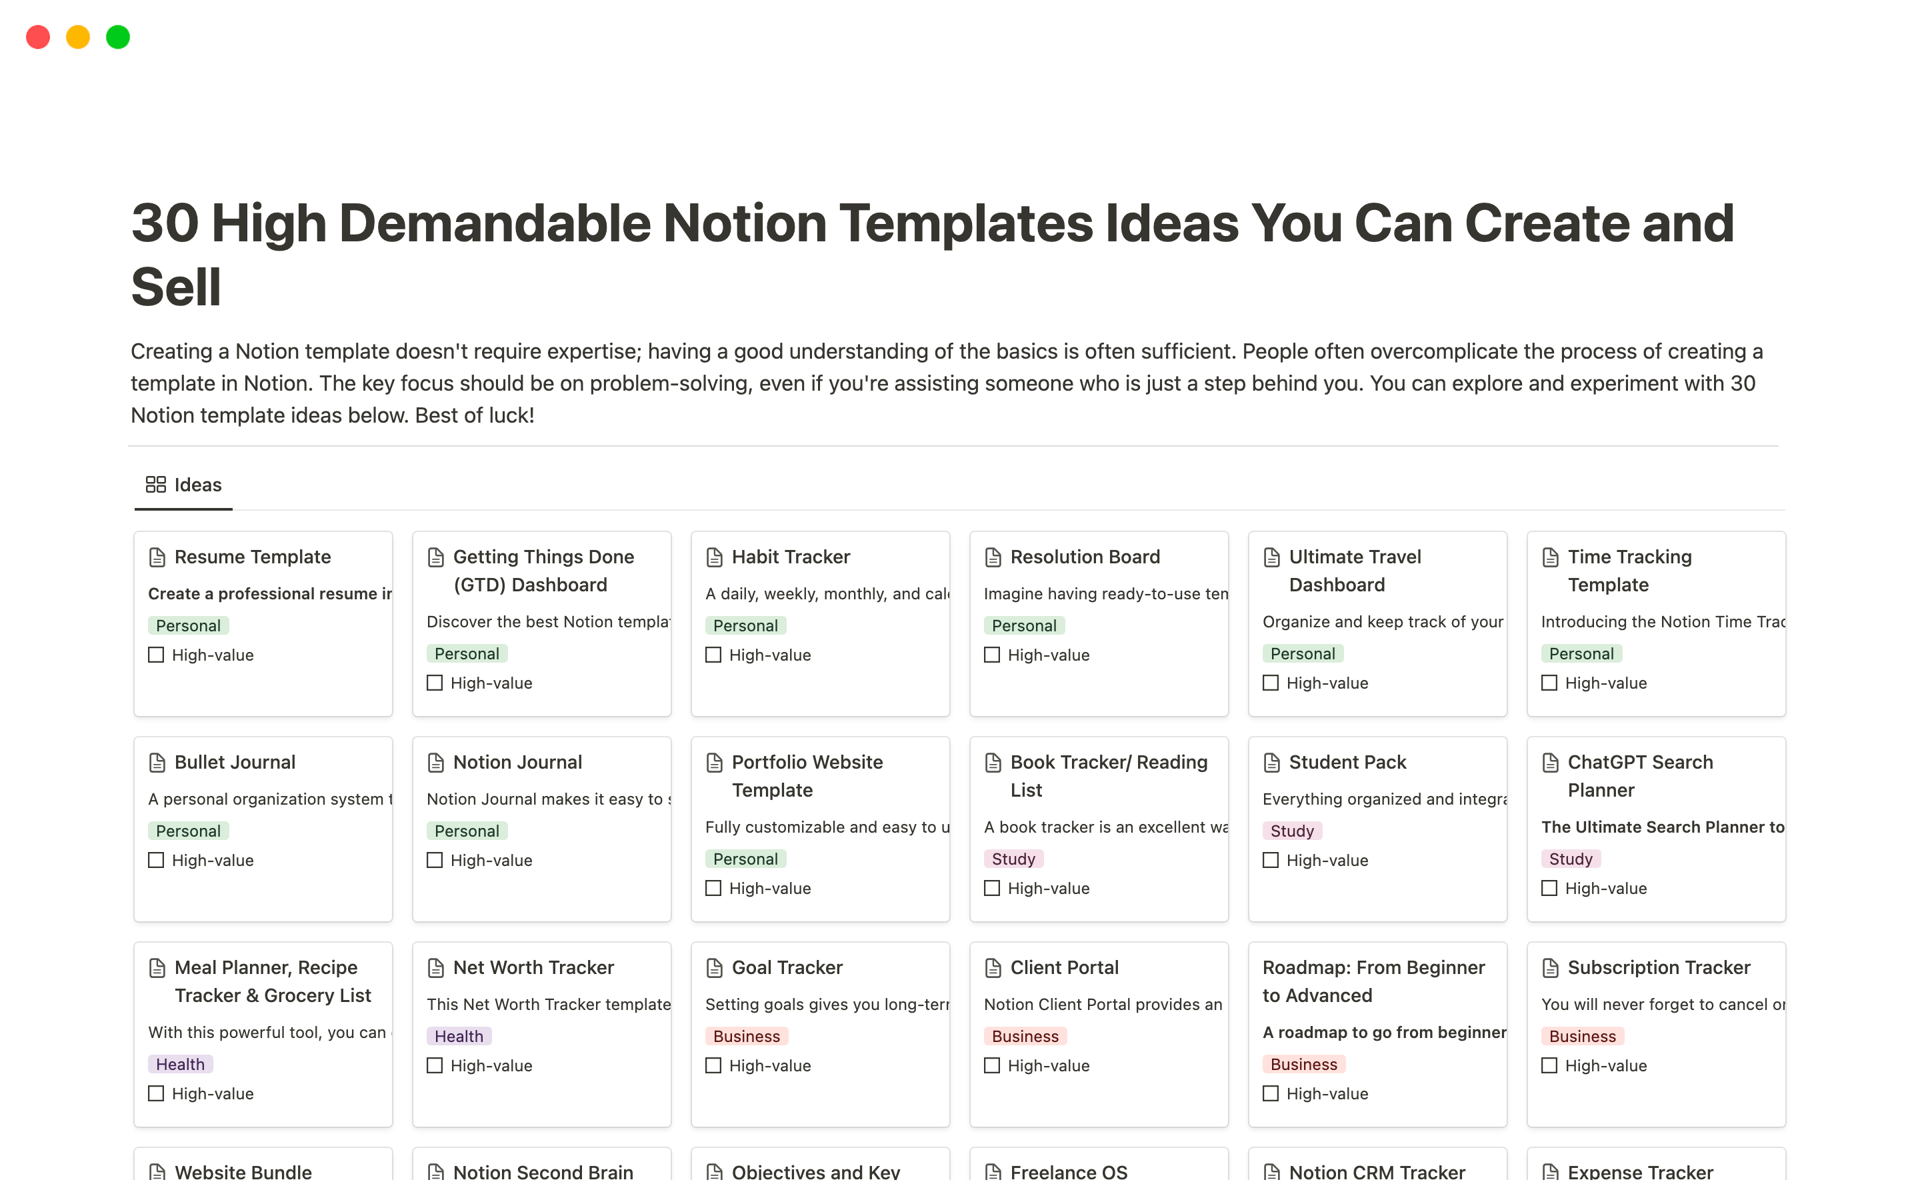 A template preview for 30 High Demandable Notion Templates Ideas